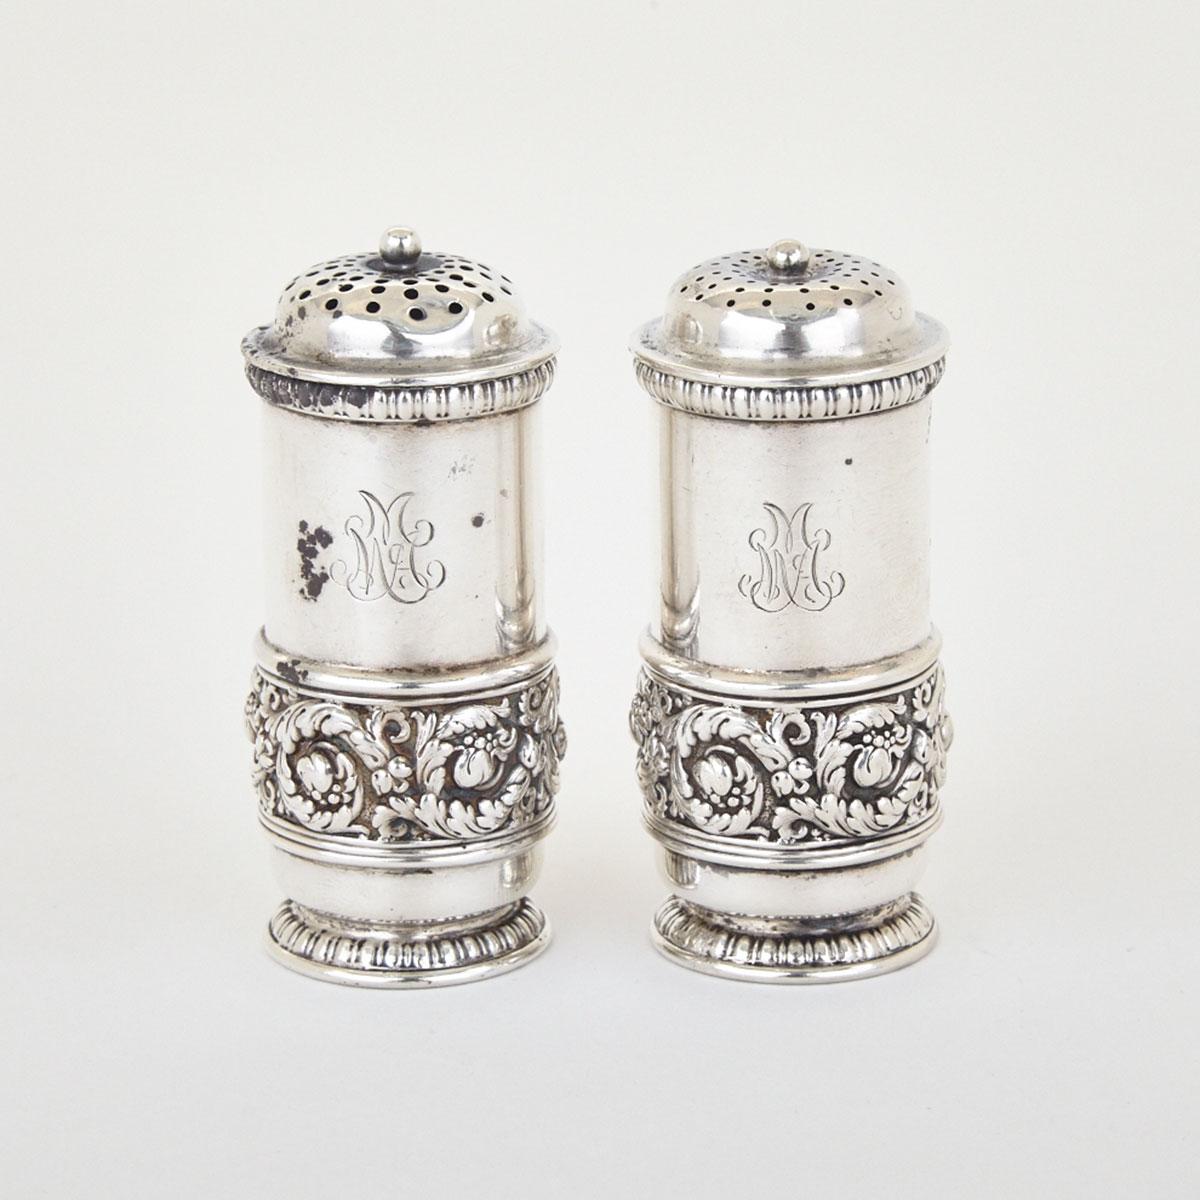 American Silver Salt and Pepper Casters, Tiffany & Co., New York, N.Y., 20th century